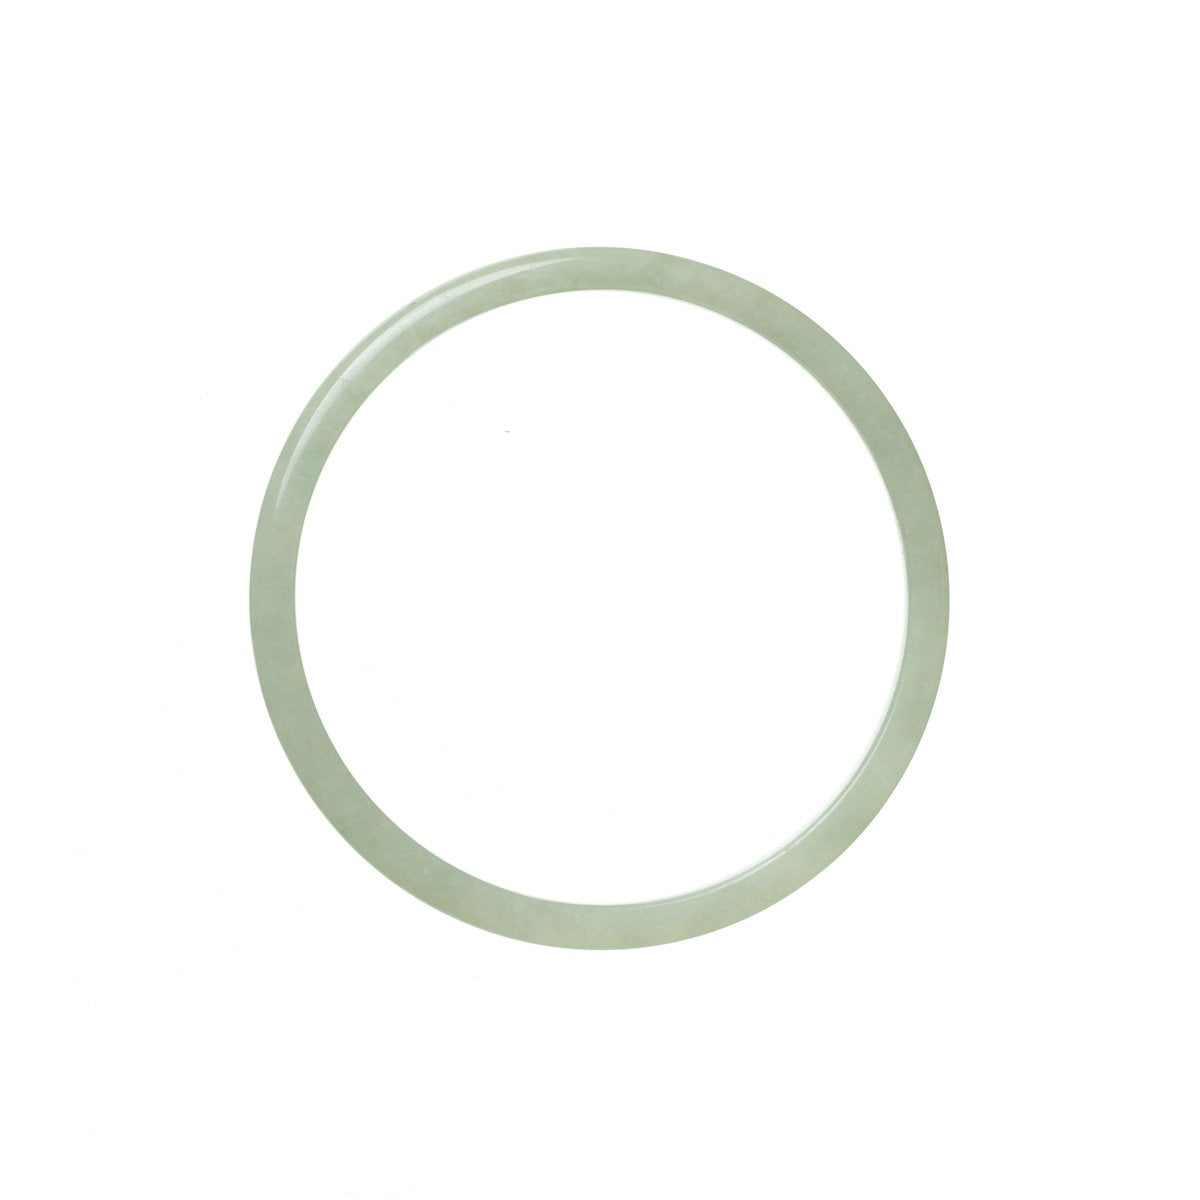 A pale green traditional jade bangle, thin in size, made from genuine grade A jade.